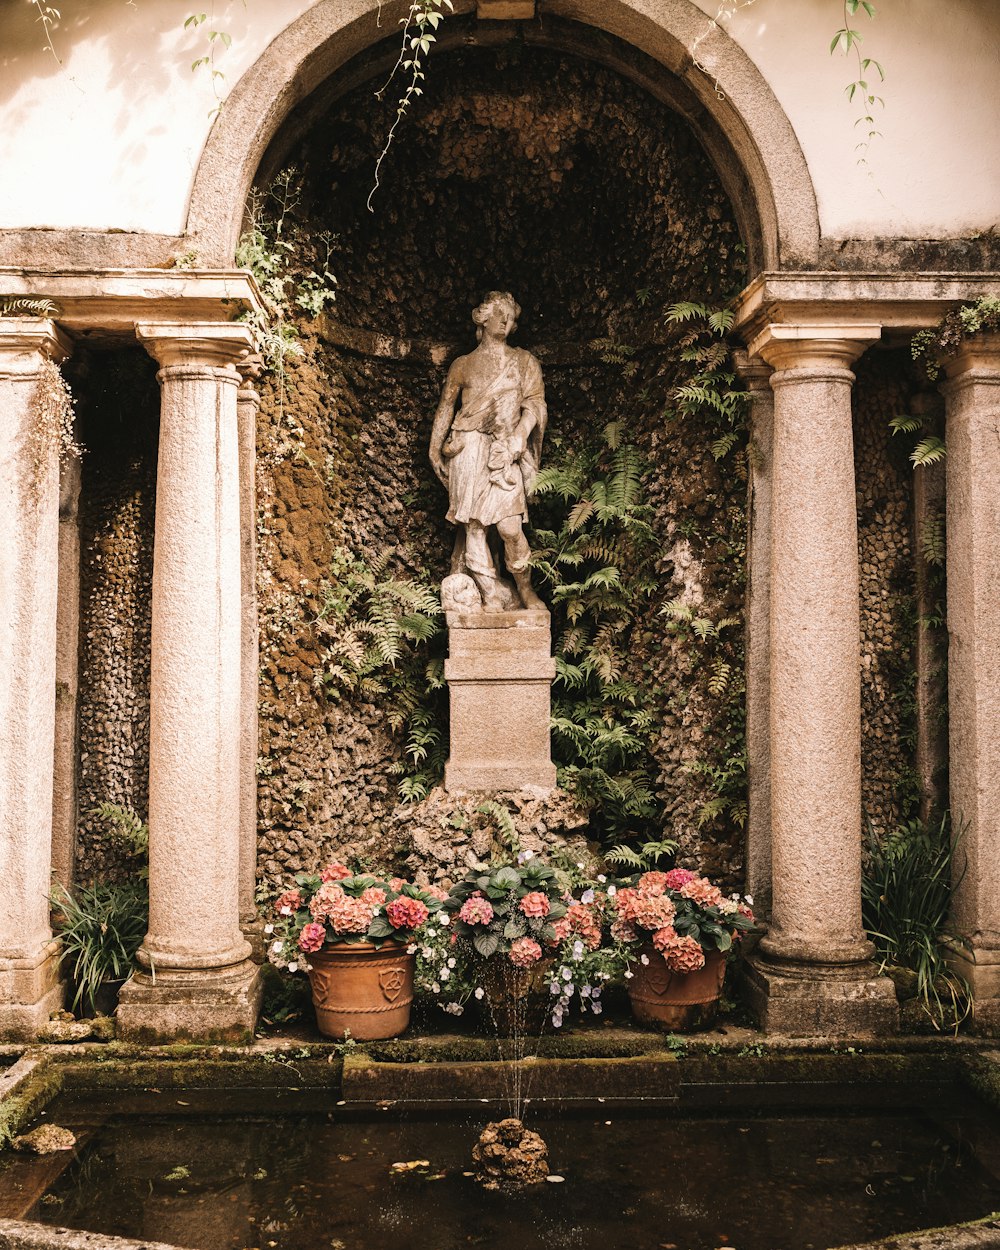 a statue of a man surrounded by flowers